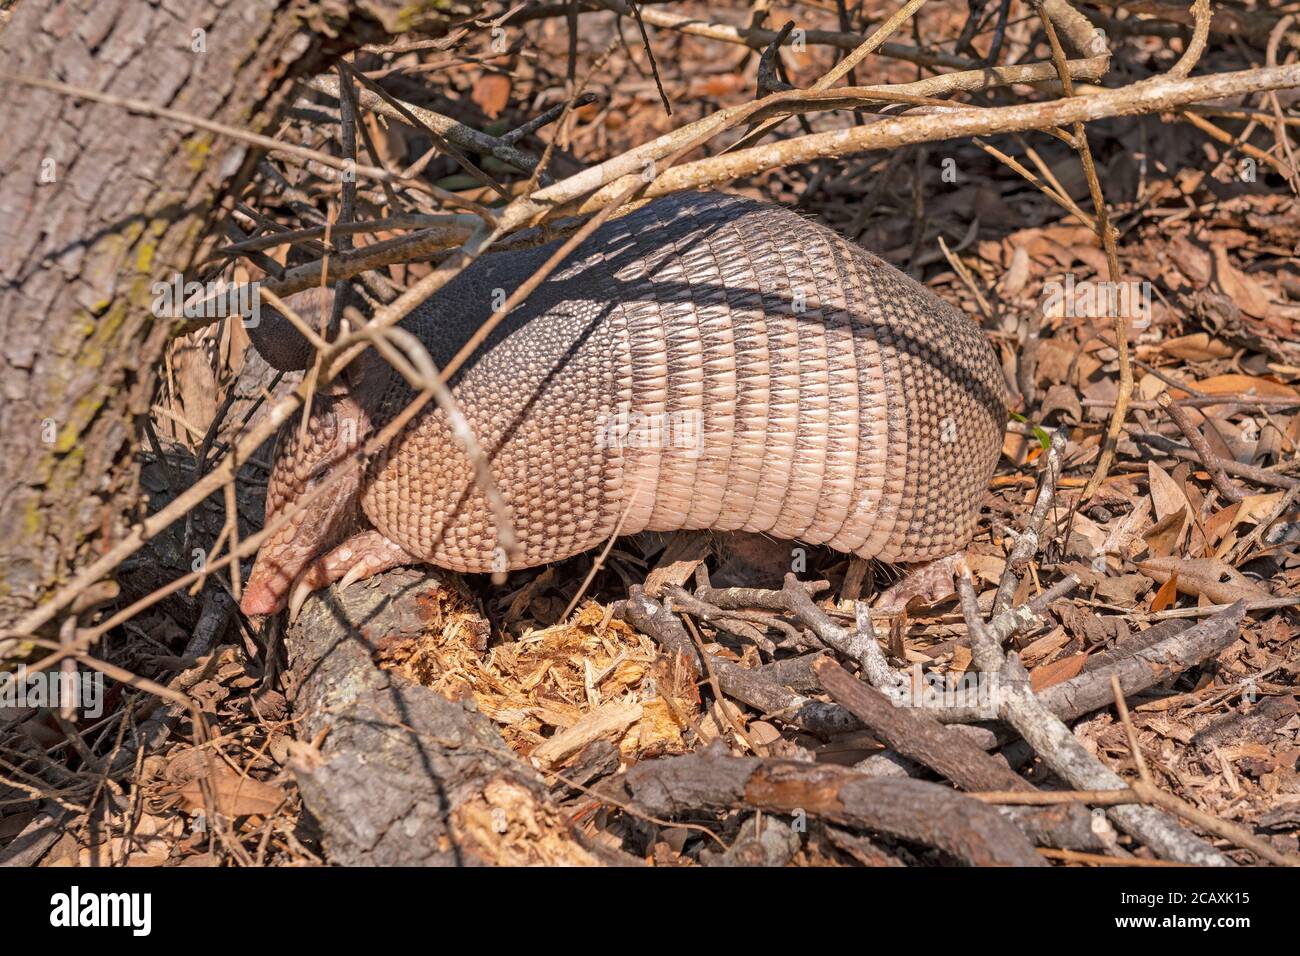 Nine Banded Armadillo searching for food in the Undergrowth in the Aransas National Wildlife Refuge in Texas Stock Photo